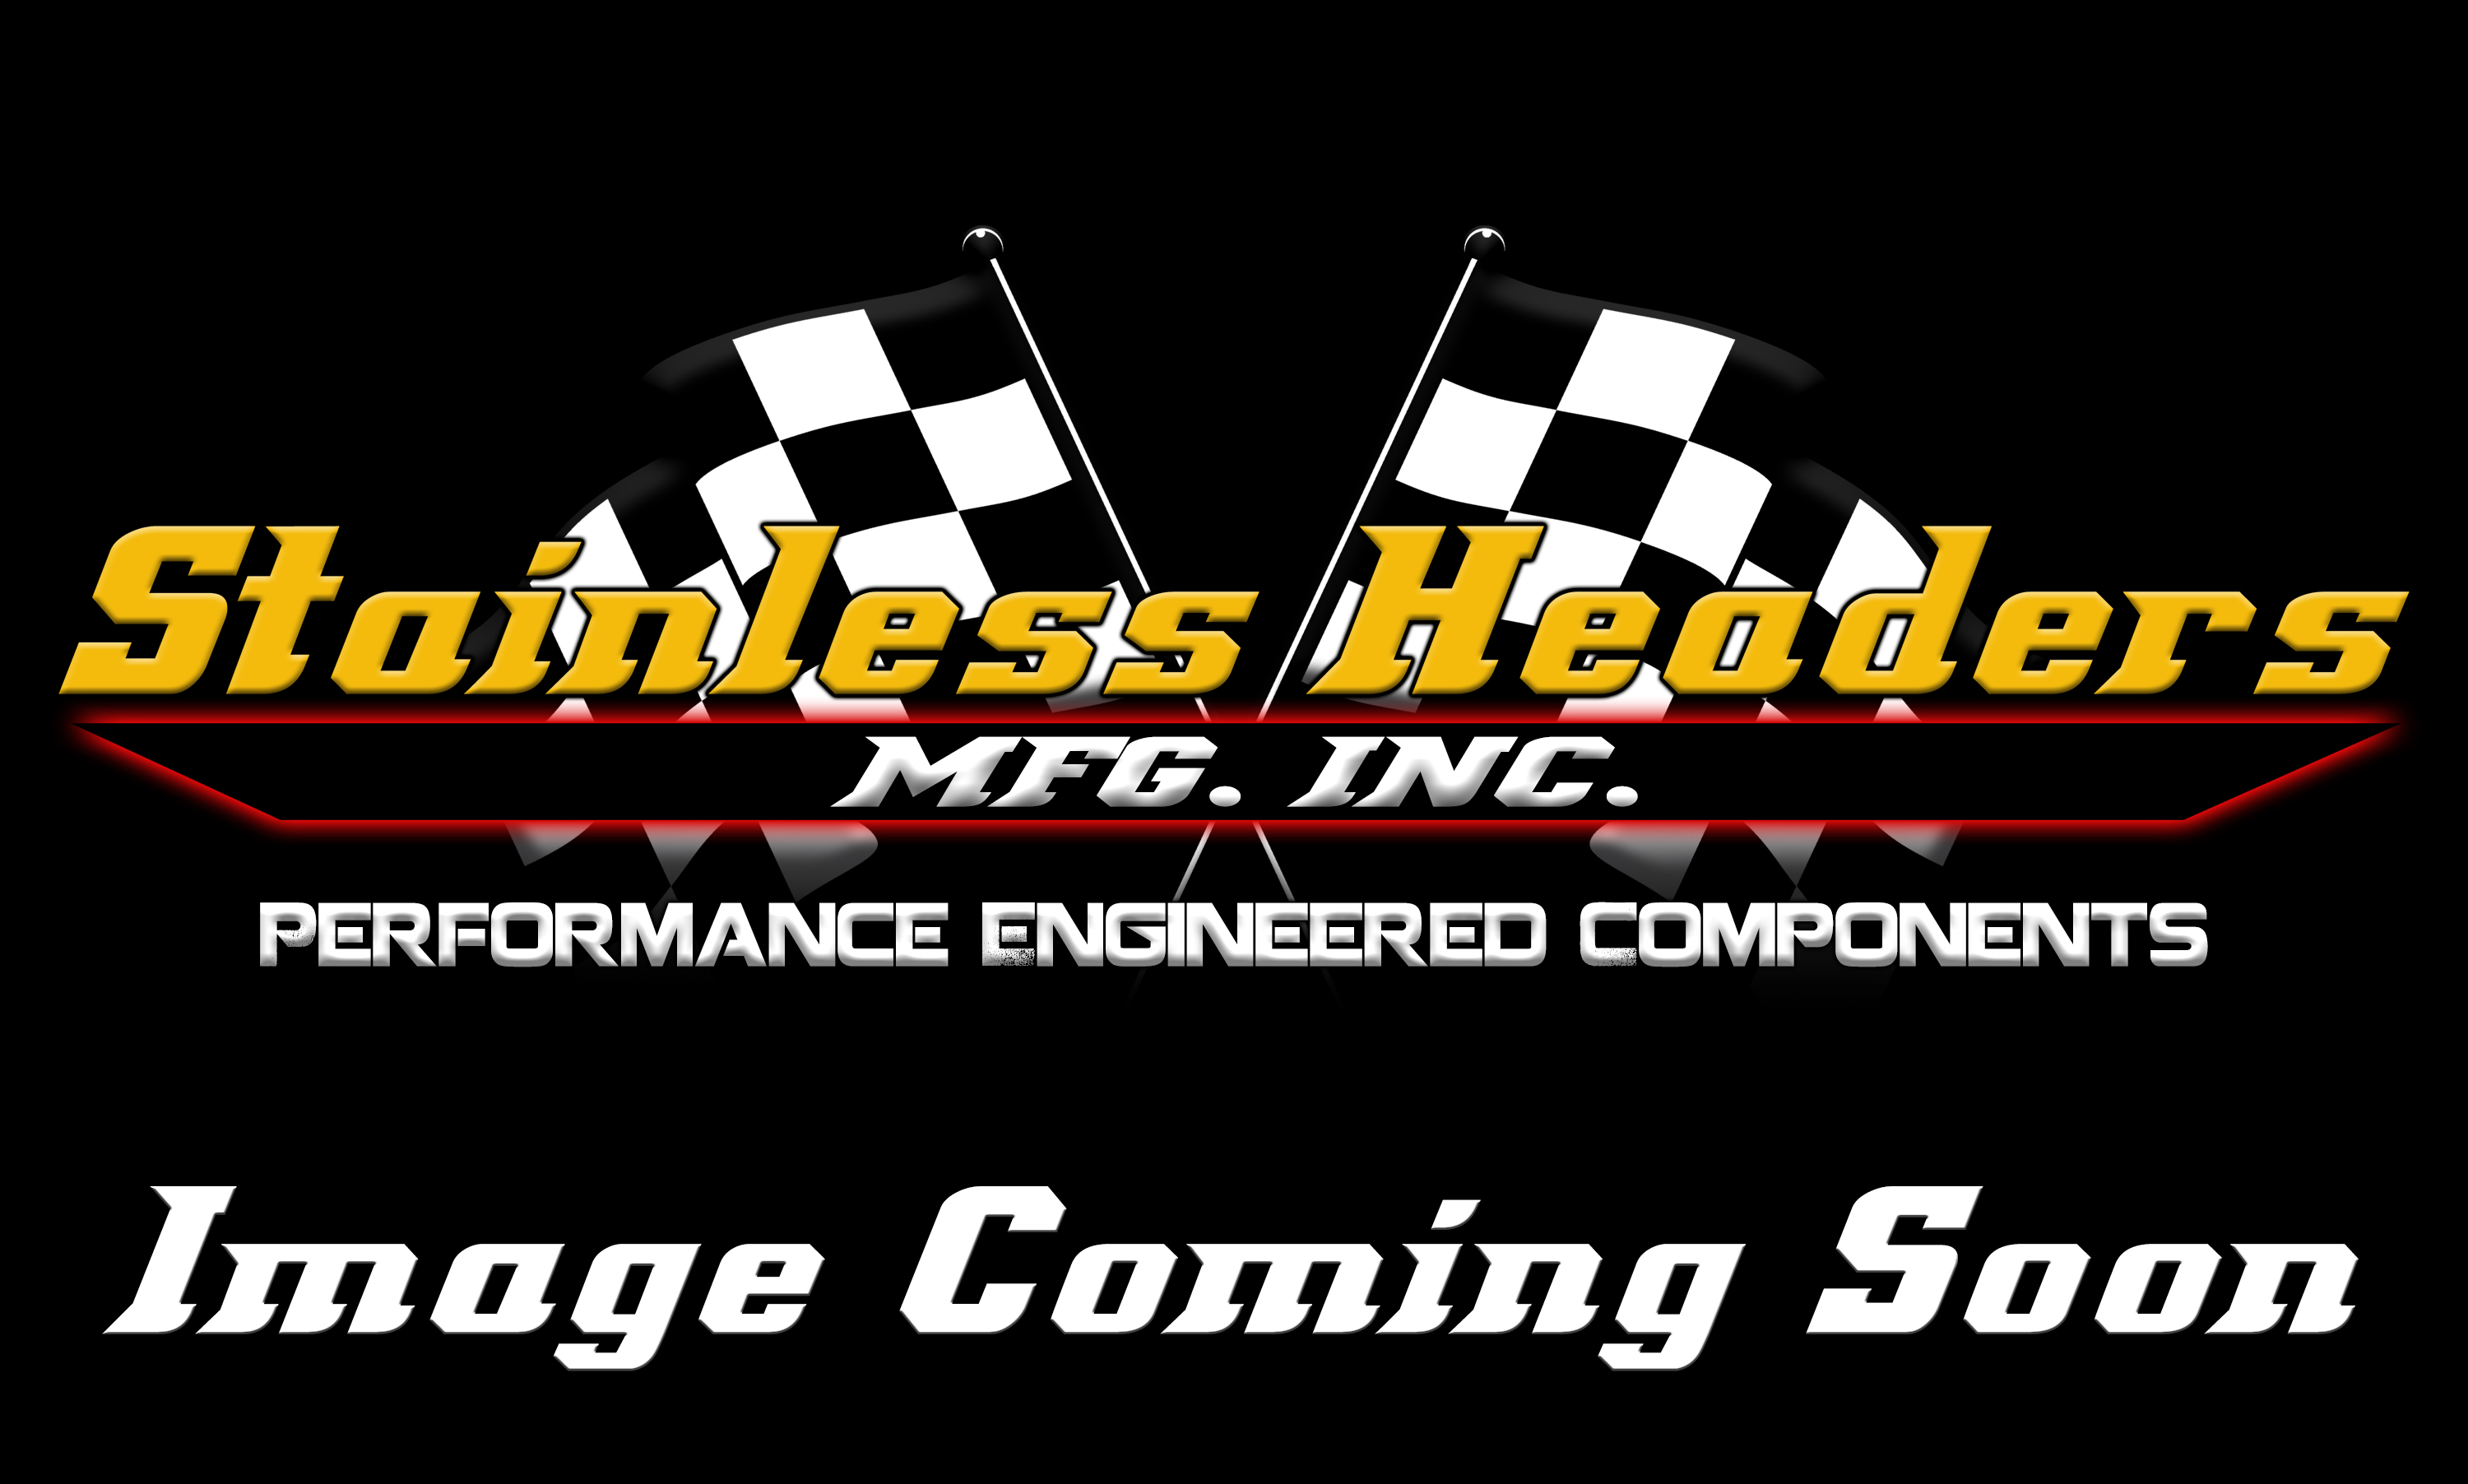 CompTurbo Technology Turbochargers - Comp Turbo Journal Bearing Turbochargers - CompTurbo Technologies - CTR2868S-4847 360 Journal Bearing Turbocharger (575 HP)